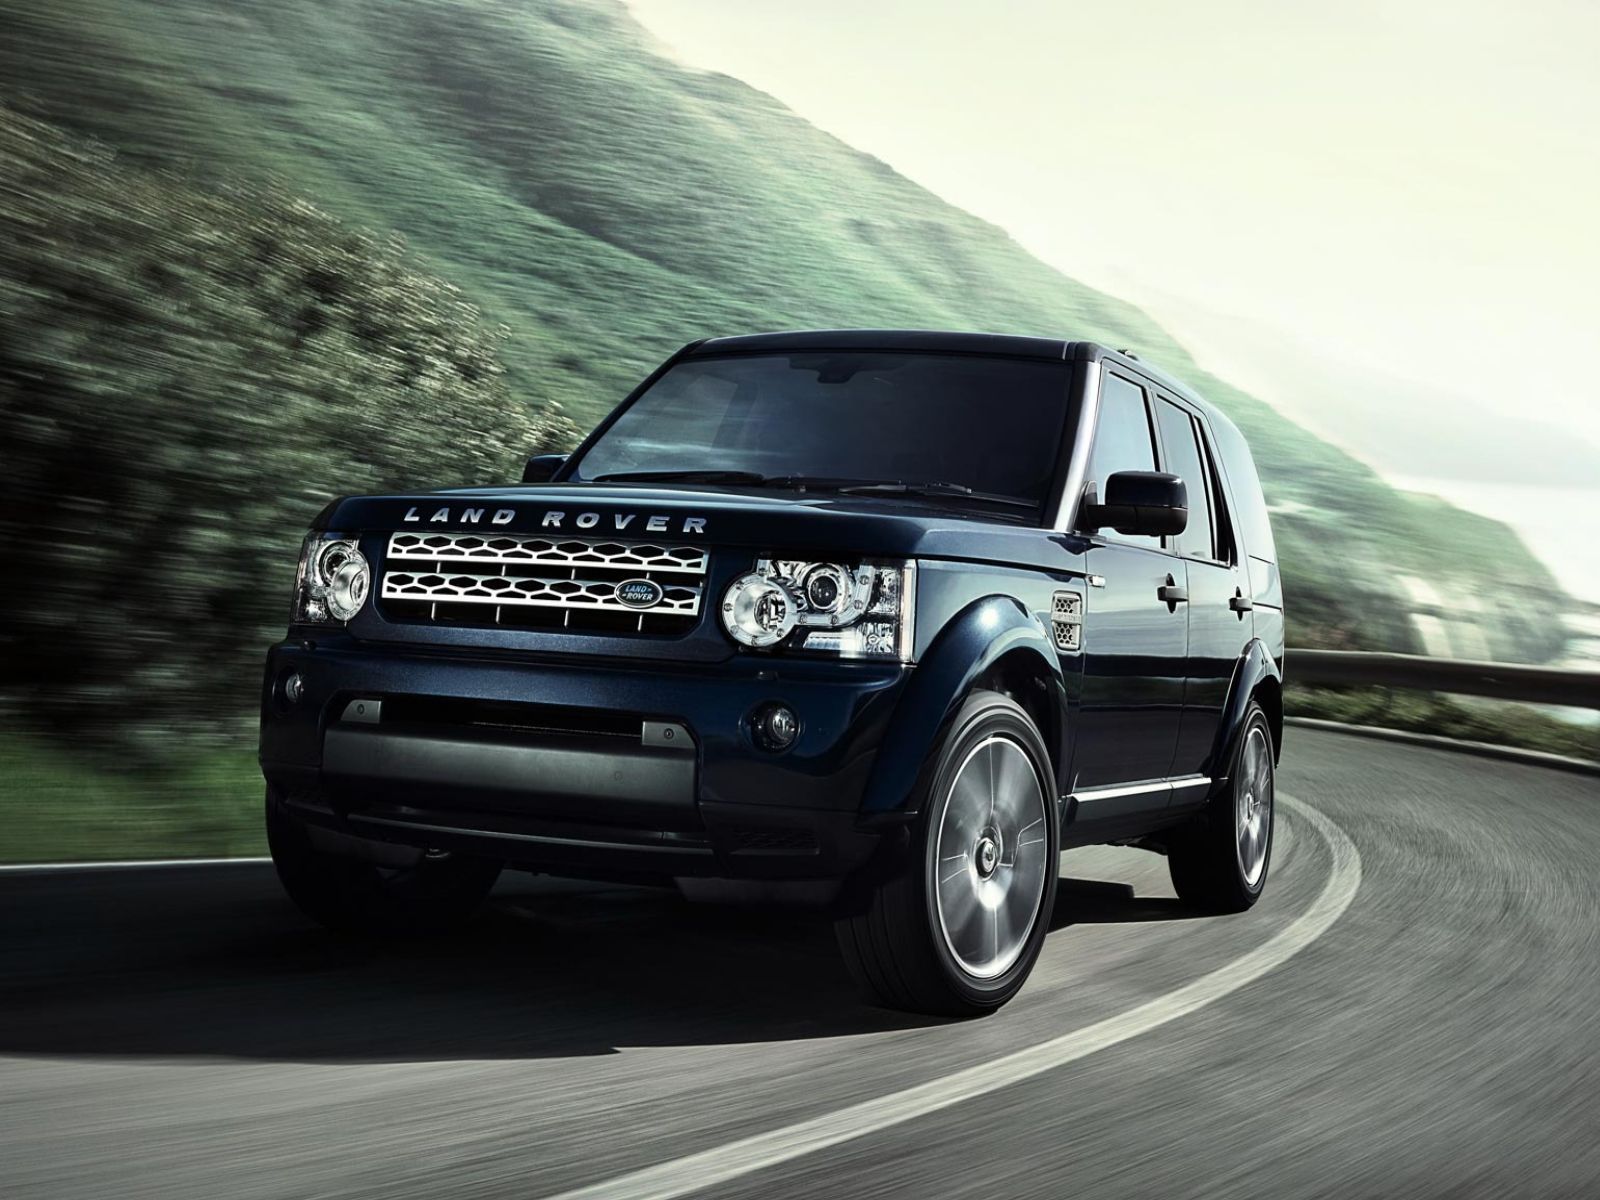 Test drive the car Land Rover Discovery 3 wallpapers and images ...
 2014 Land Rover Discovery Wallpaper